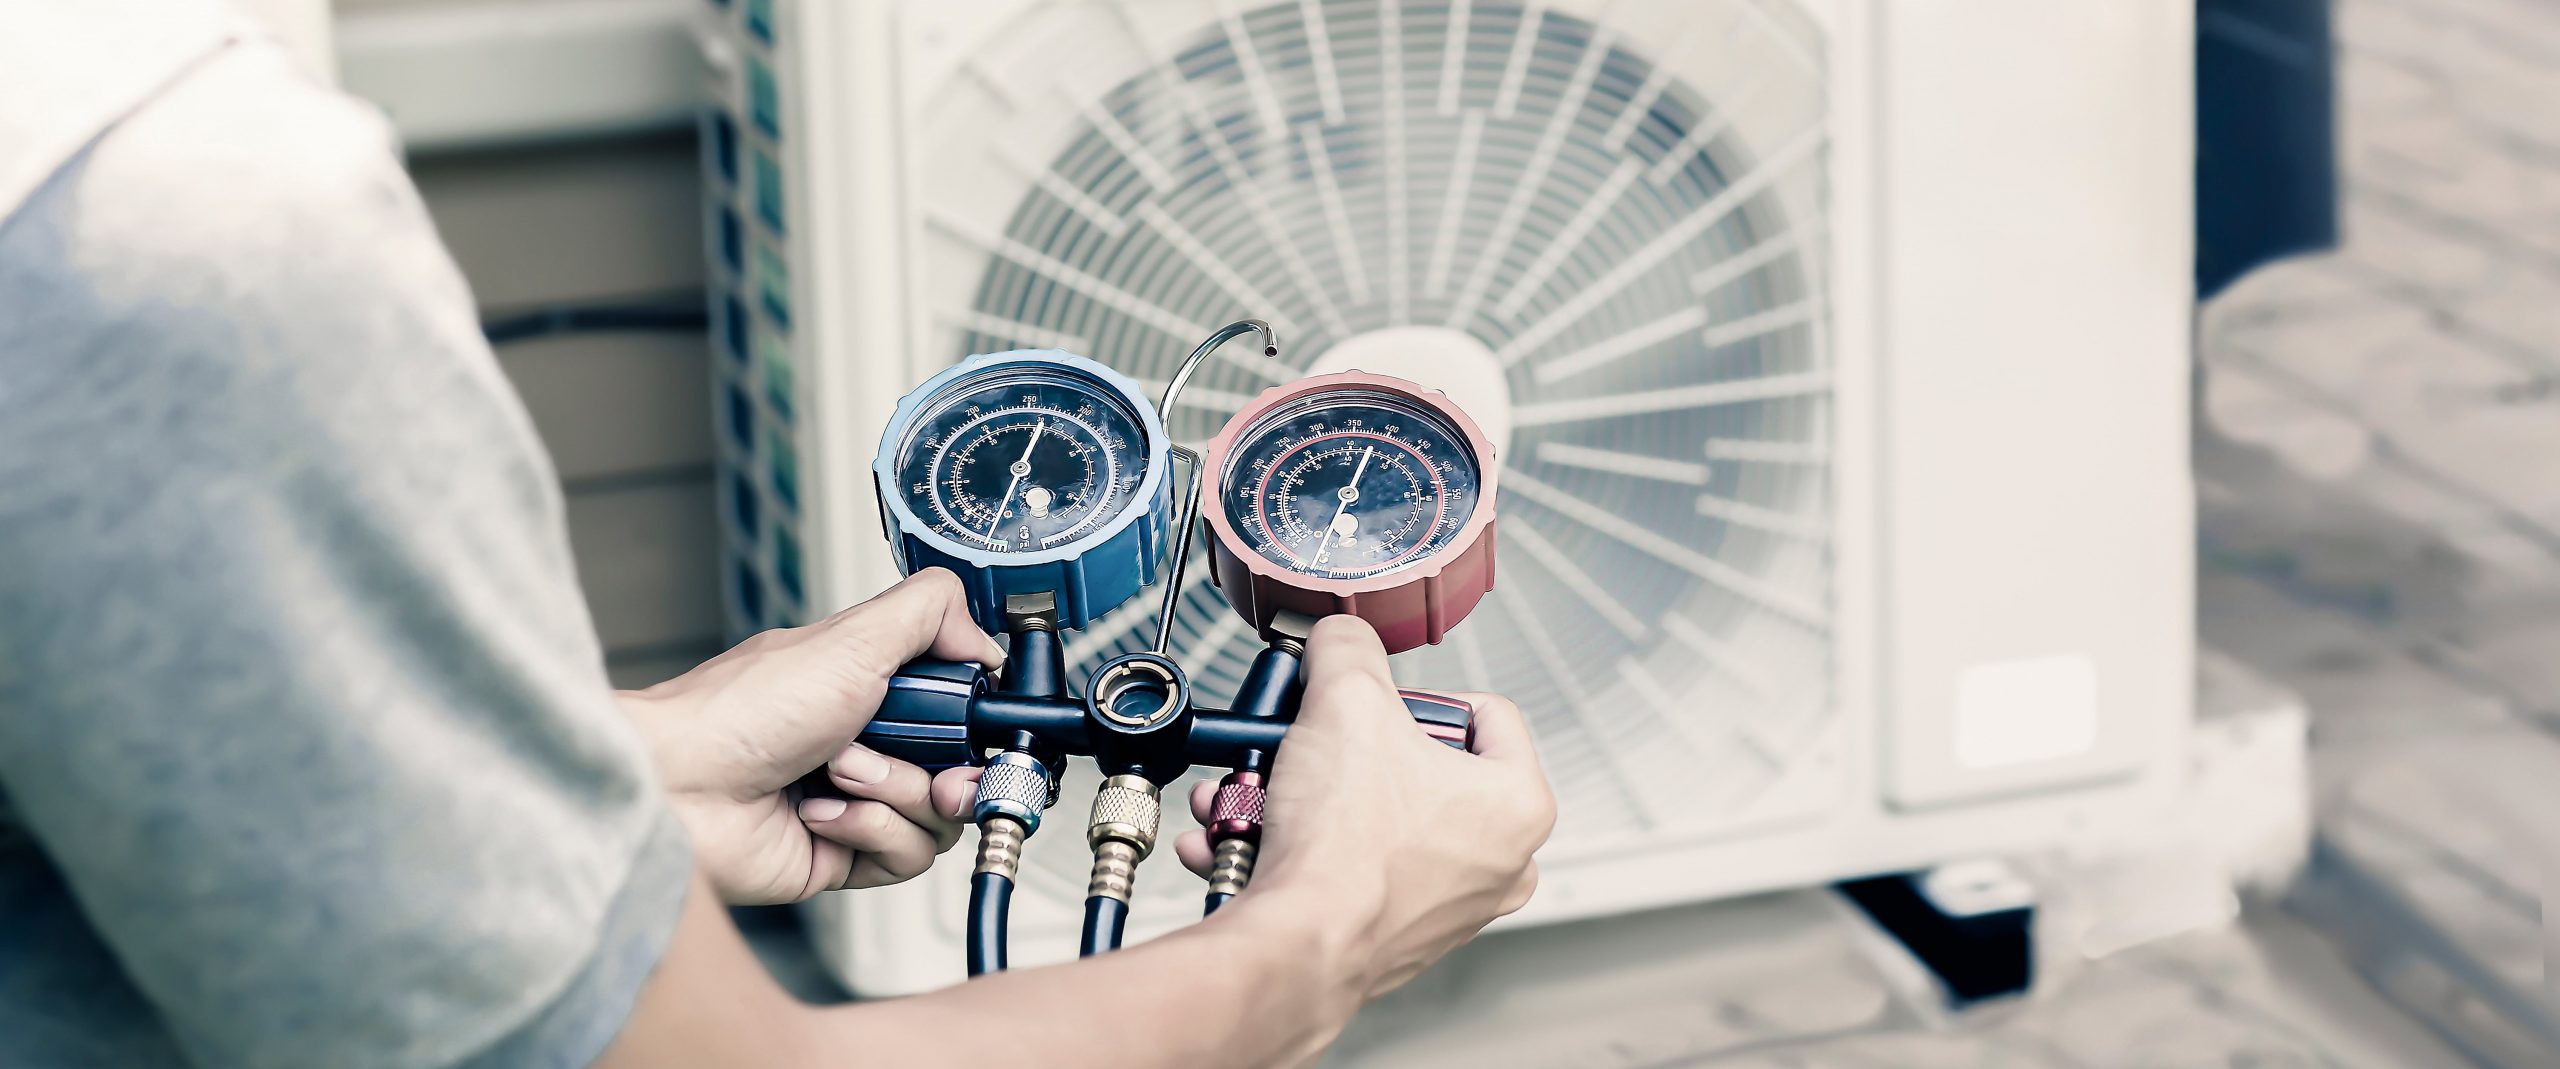 At Keith Heating & Air, we perform several services such as HVAC load calculation, HVAC repair, installation, and more.